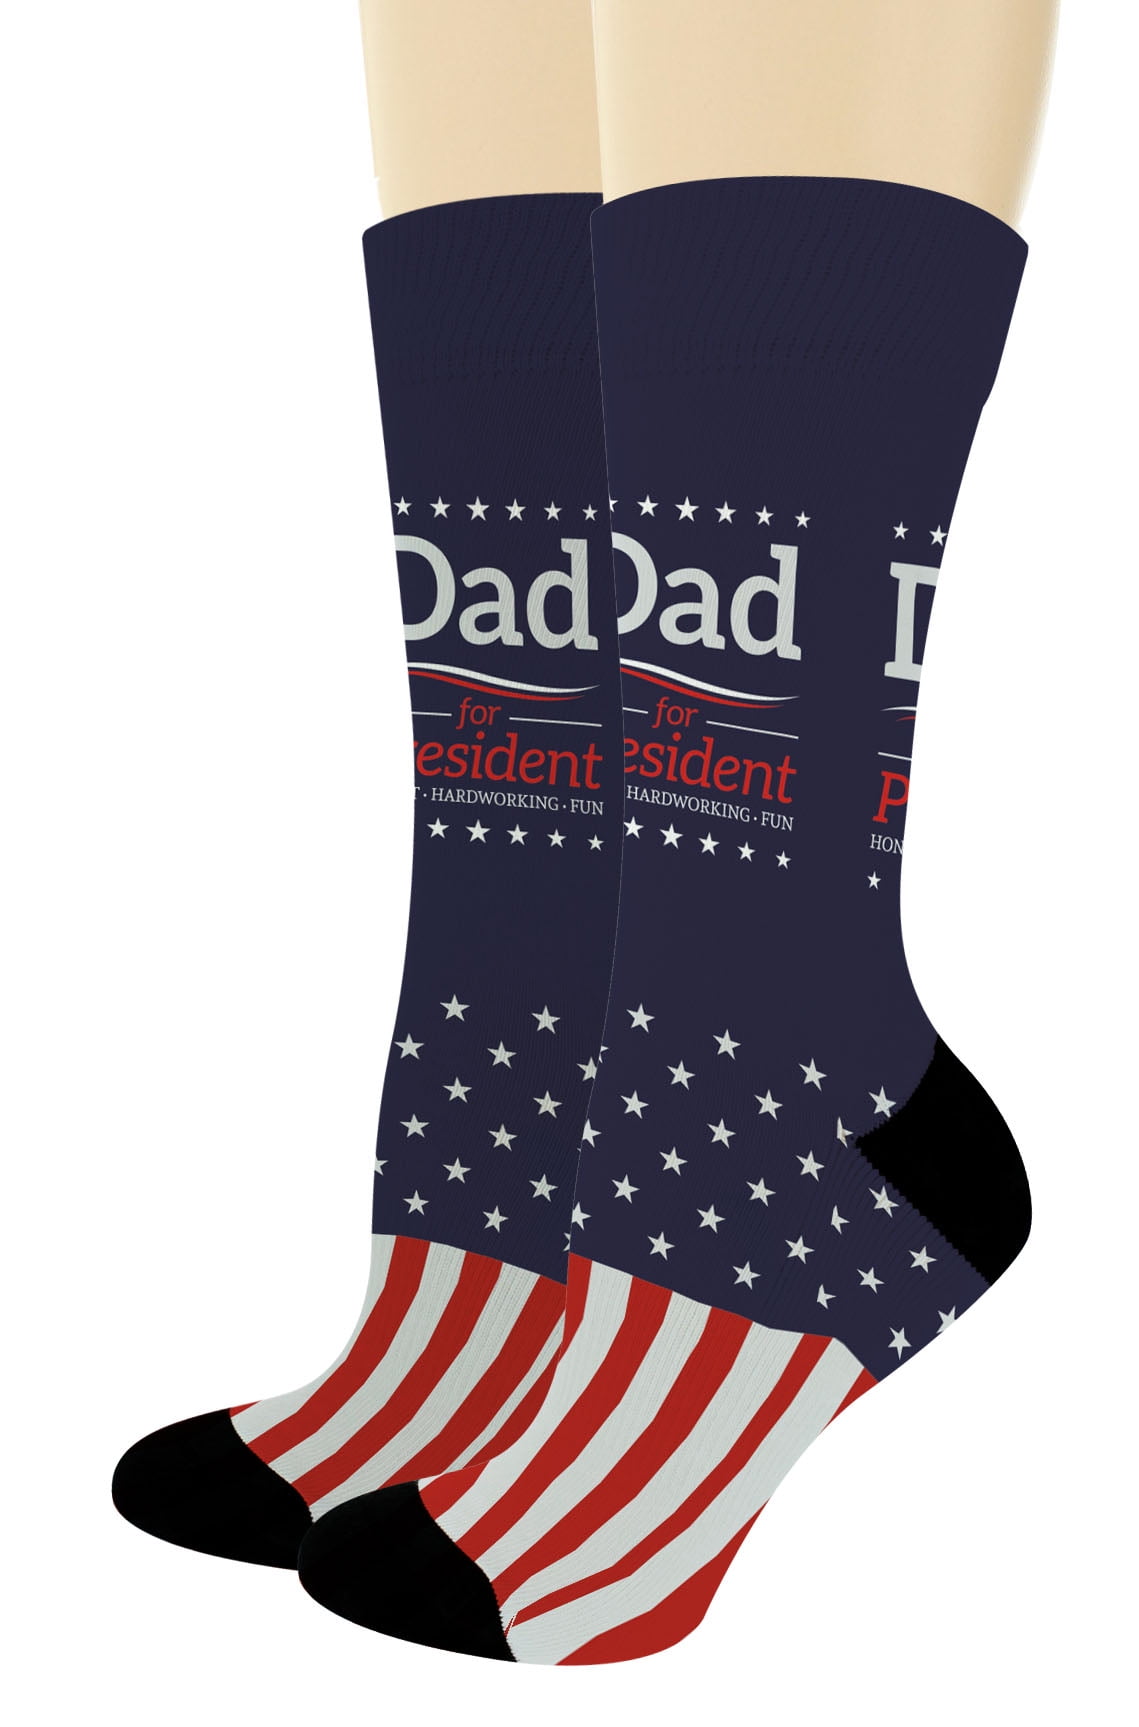 IDEAL BIRTHDAY GIFT NOVELTY FUNNY SOCKS AWESOME GRANDAD 1 PAIR